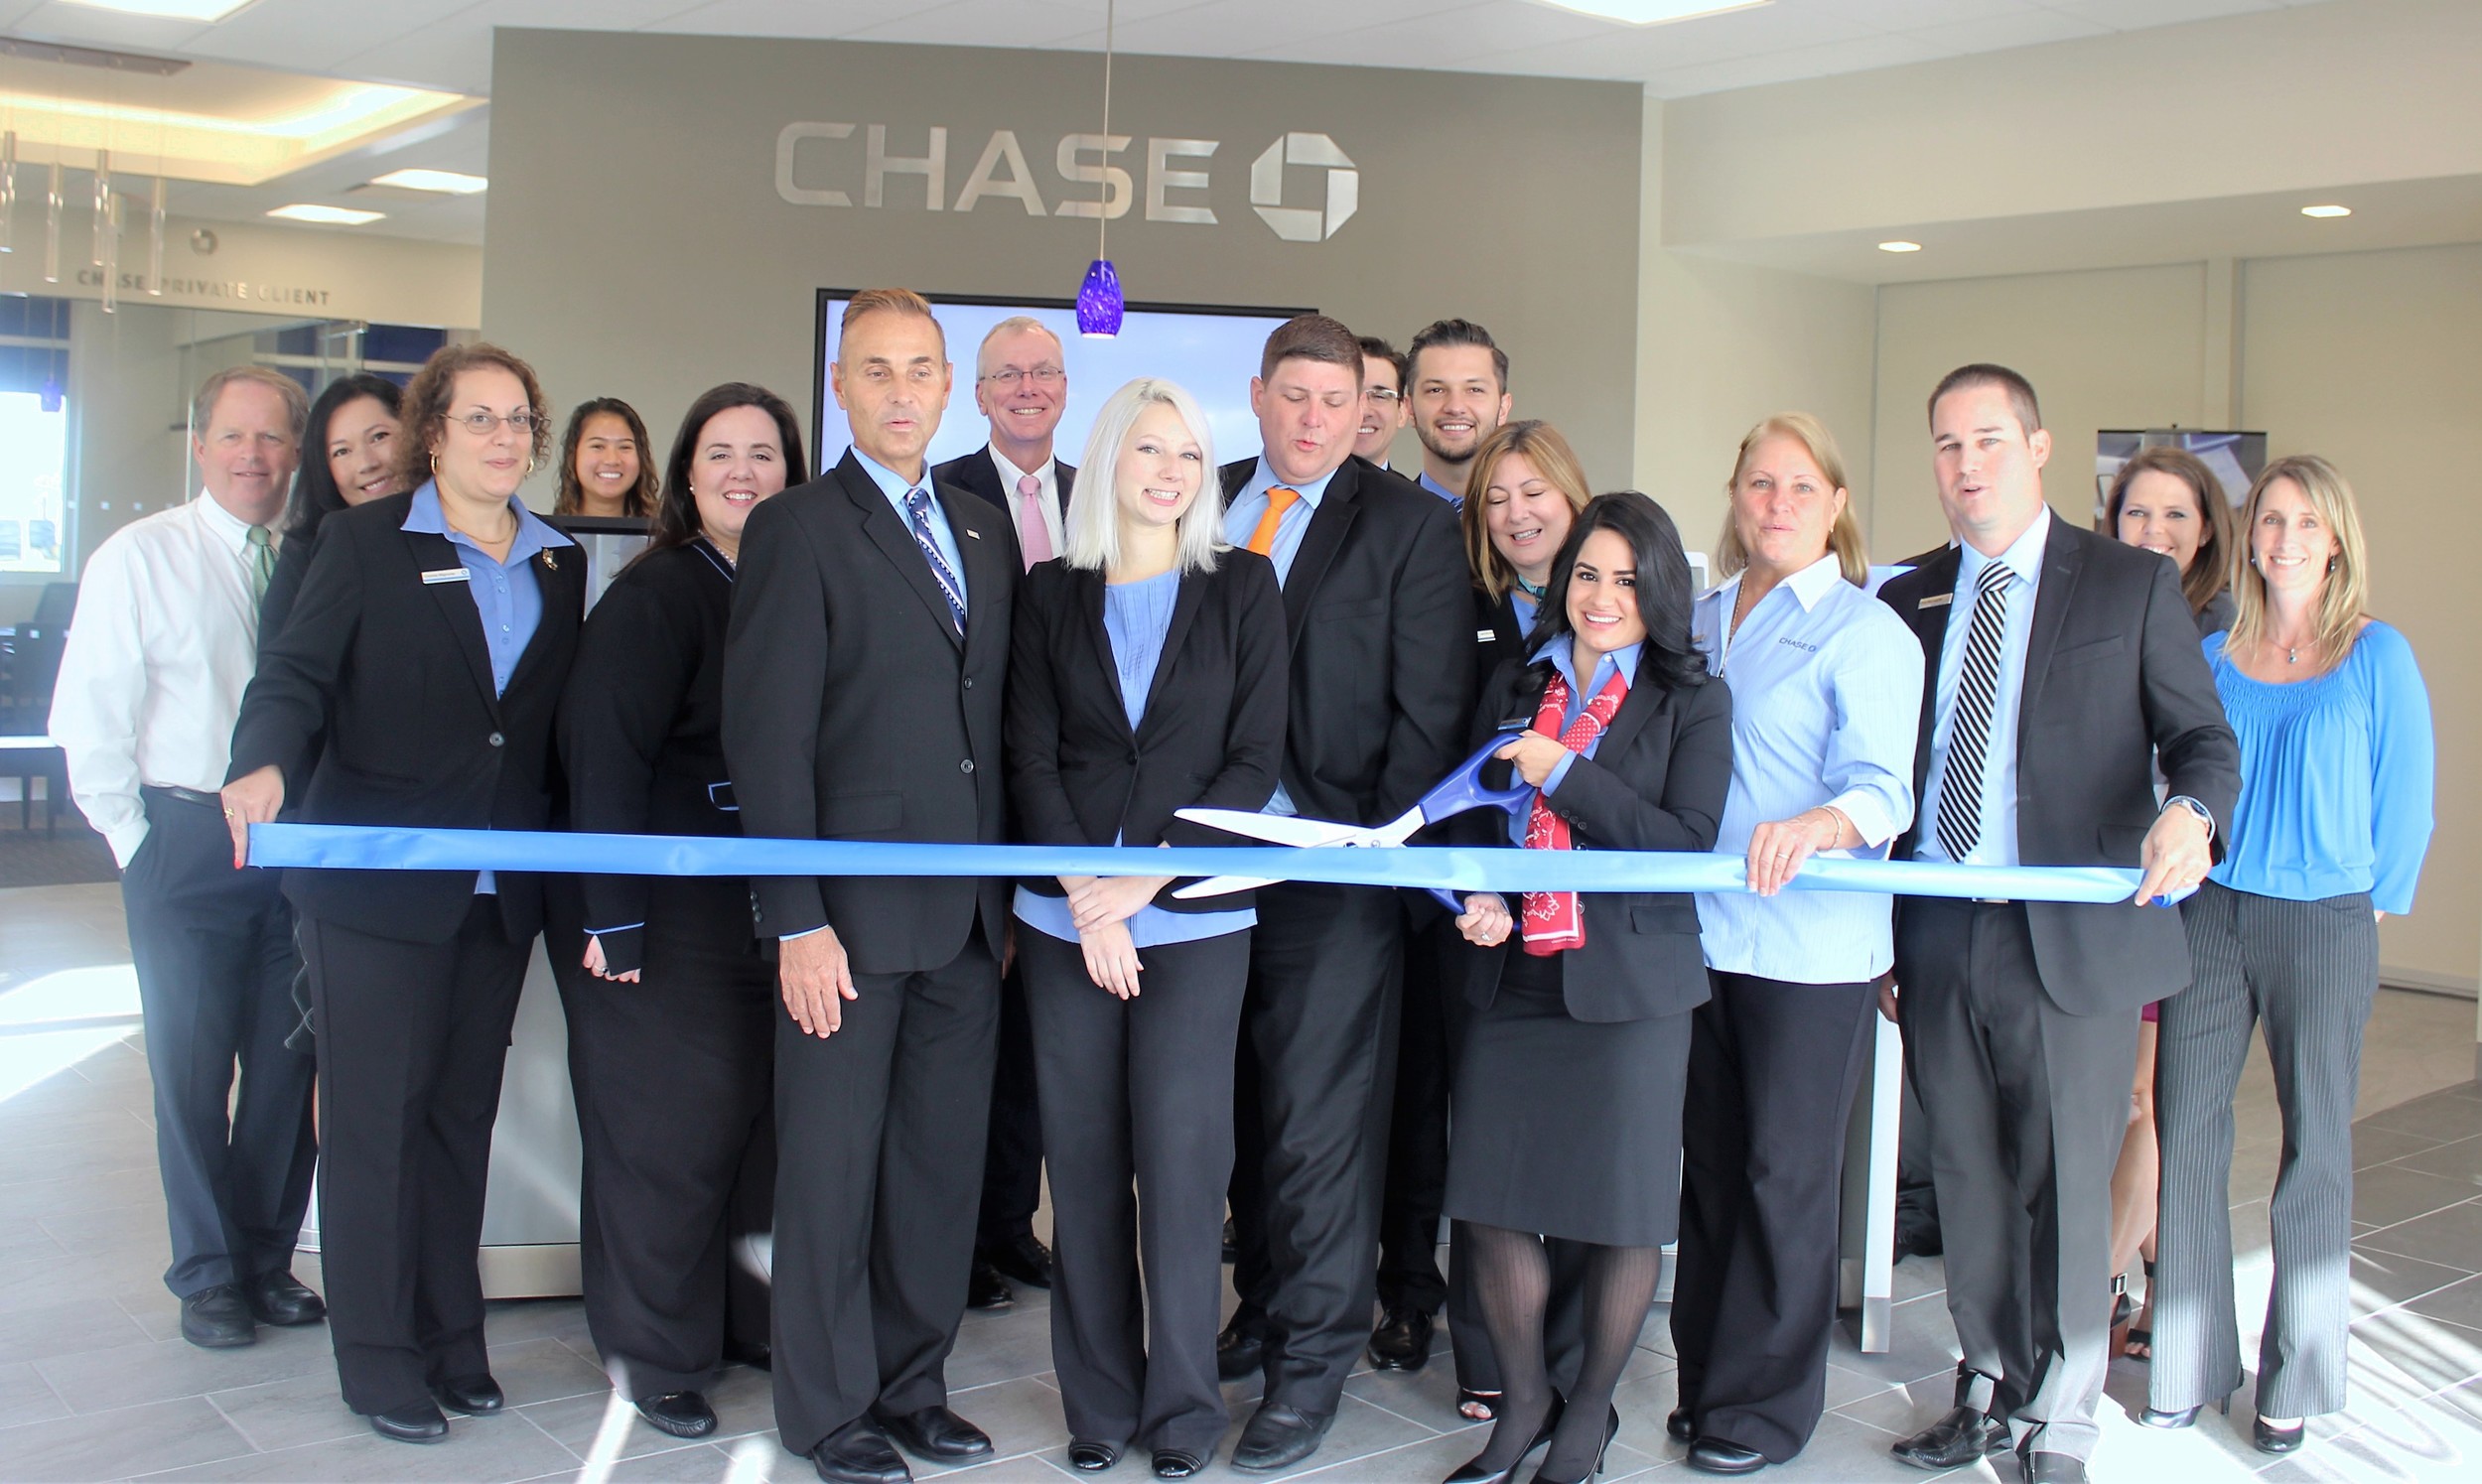 Branch Manager Leidy Cuartas cuts the ribbon at the new Chase Bank branch in Nocatee Town Center. Members of the Ponte Vedra Beach Division of the St. Johns County Chamber of Commerce were on hand to welcome the bank to the local business community.